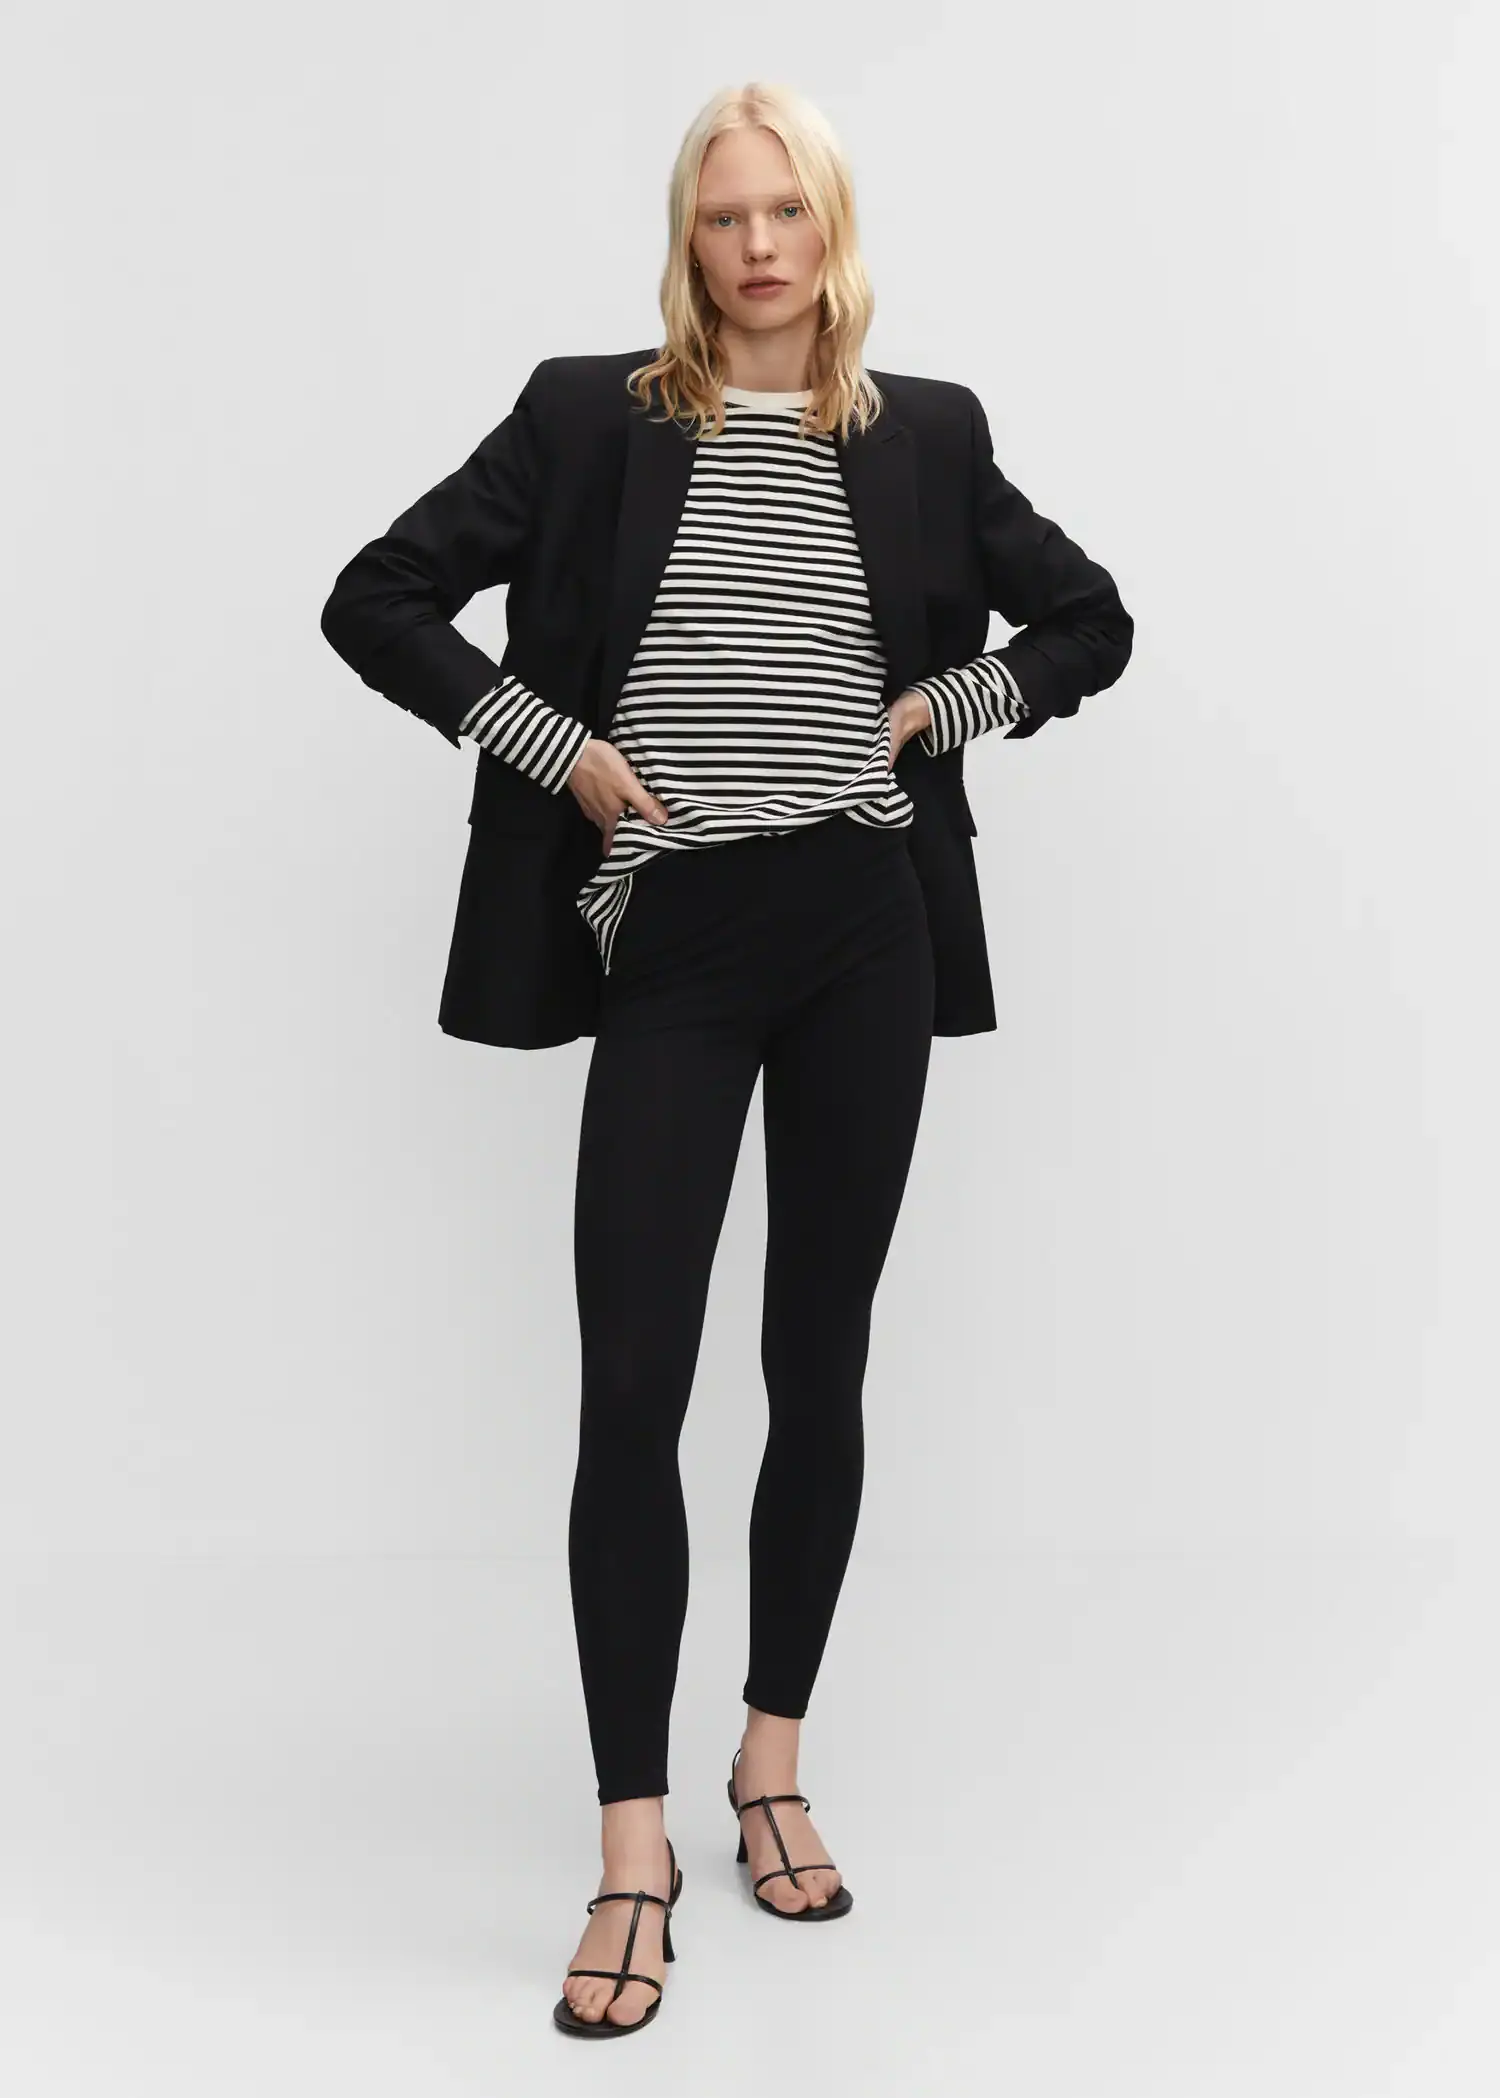 Mango High waist cotton leggings. a woman in a black and white striped shirt and jacket 